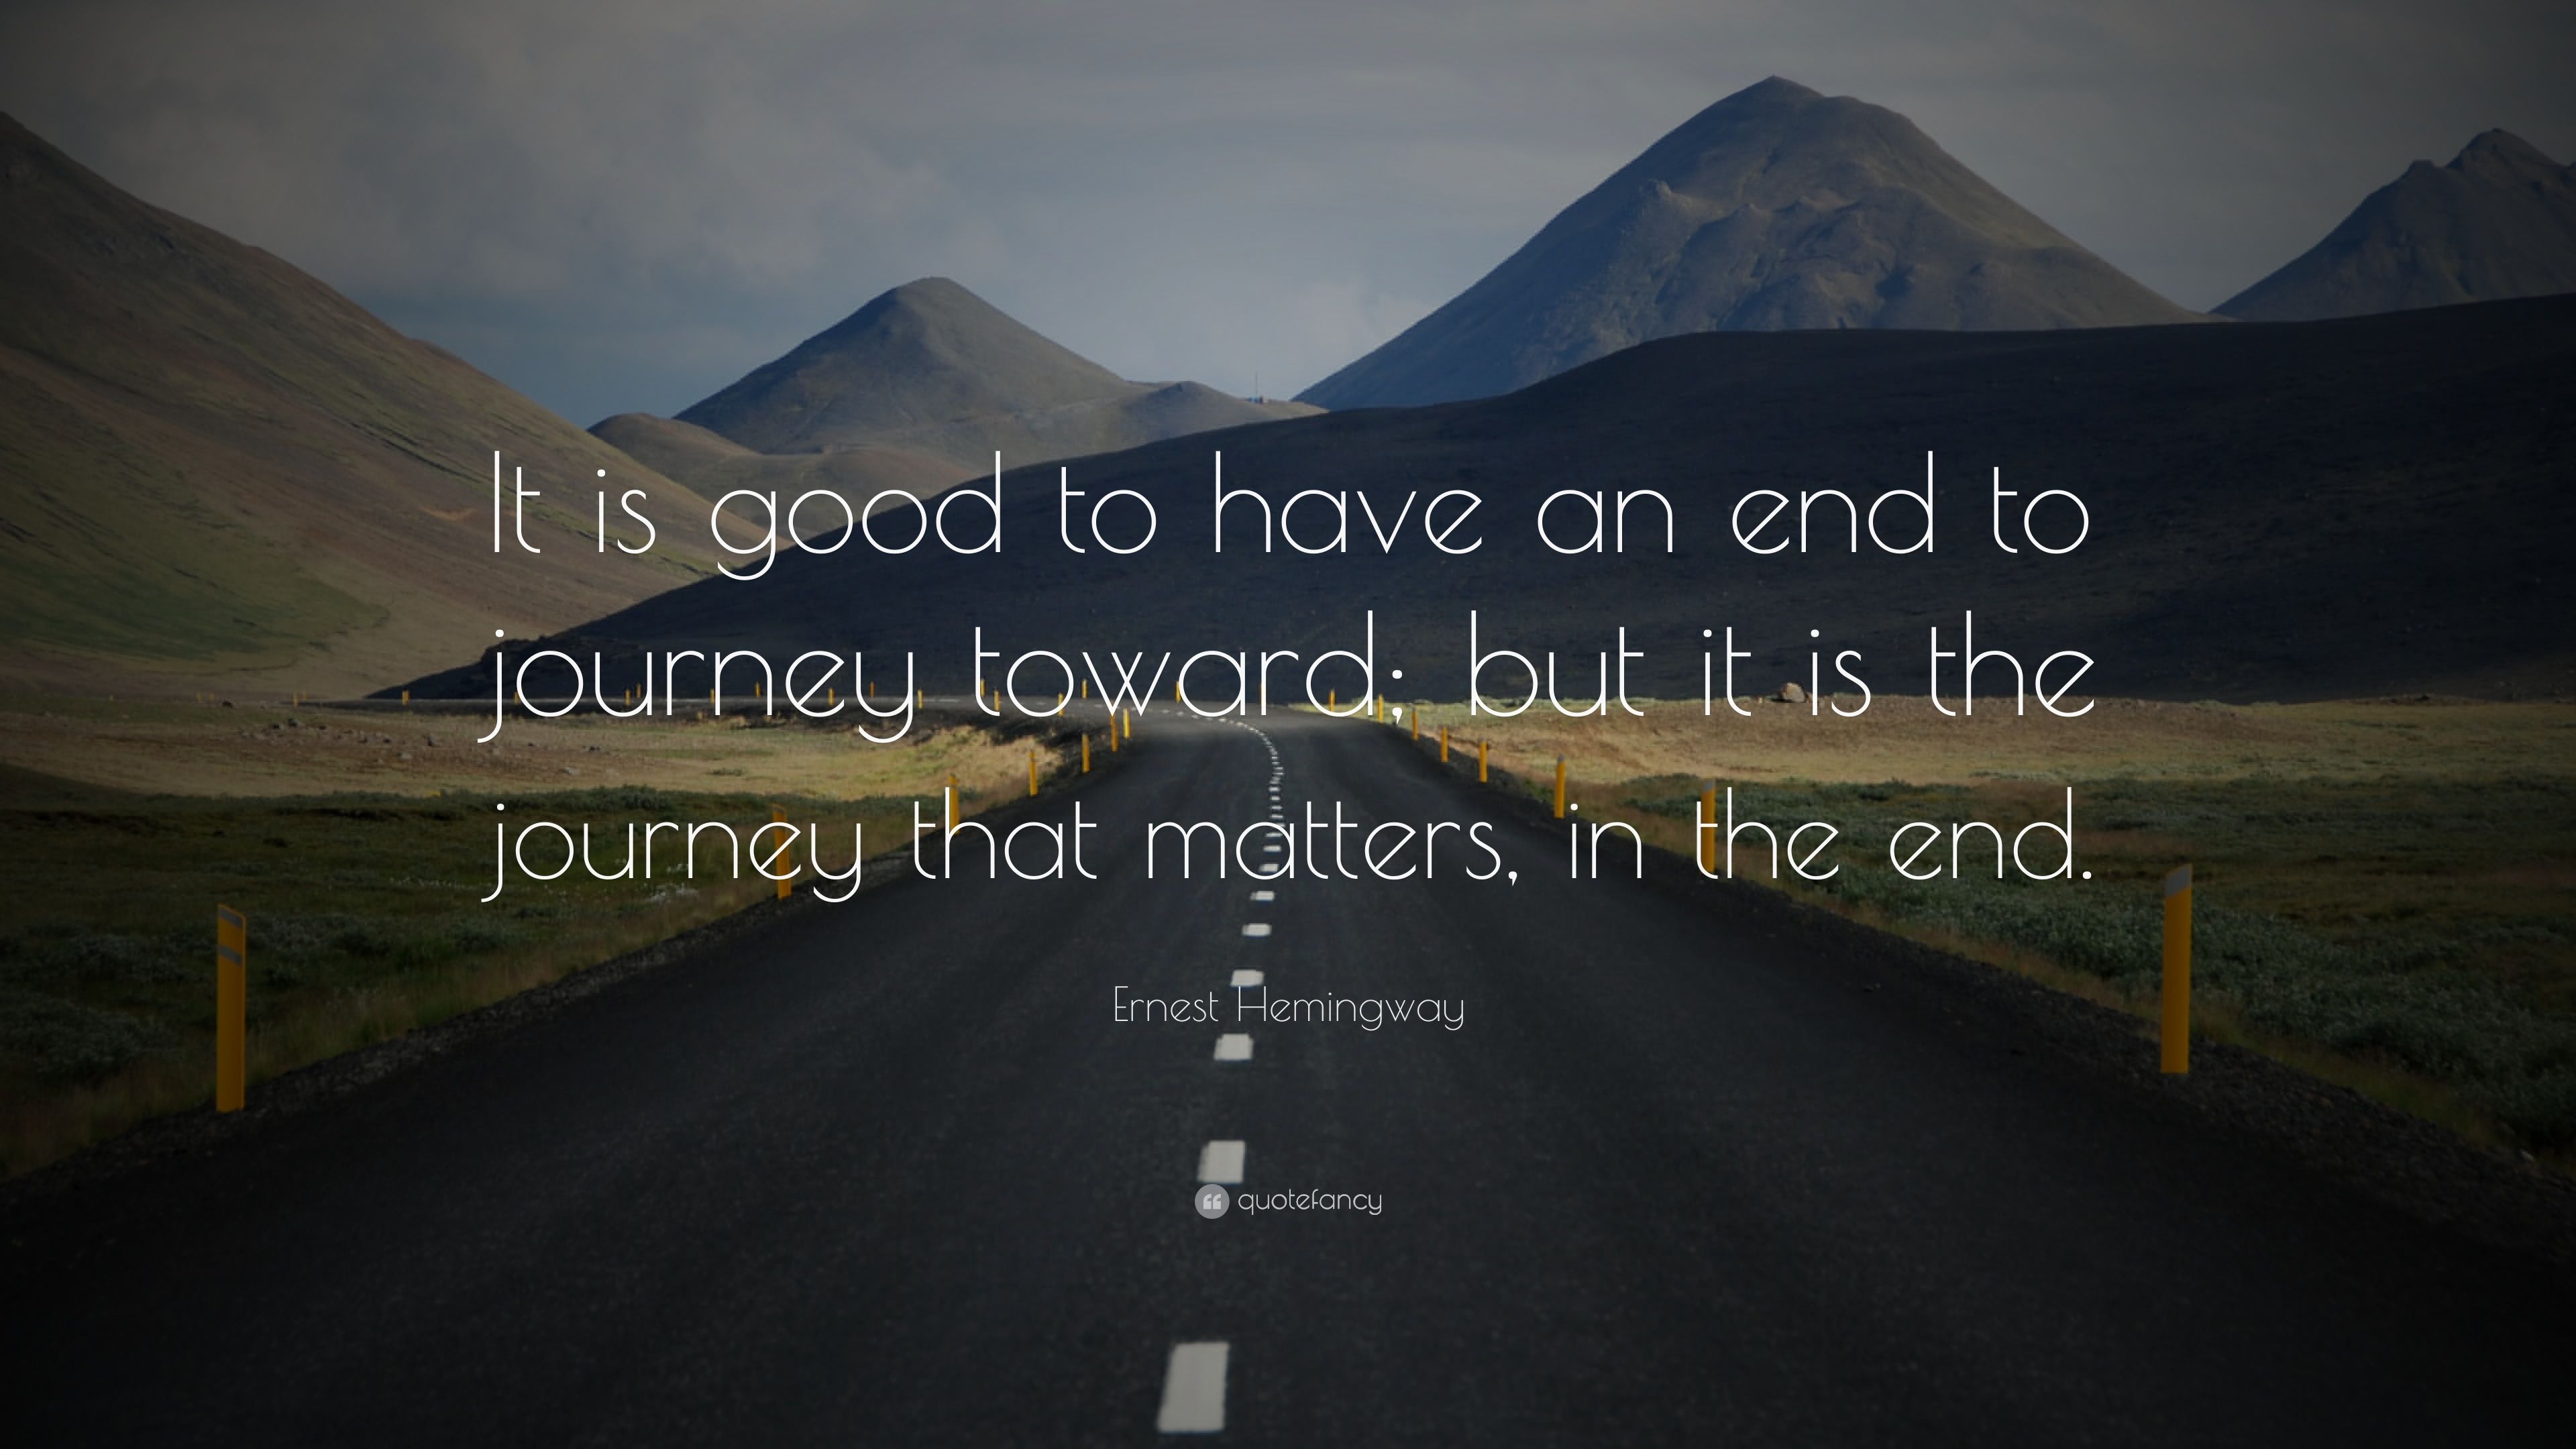 Ernest Hemingway Quote: “It is good to have an end to journey